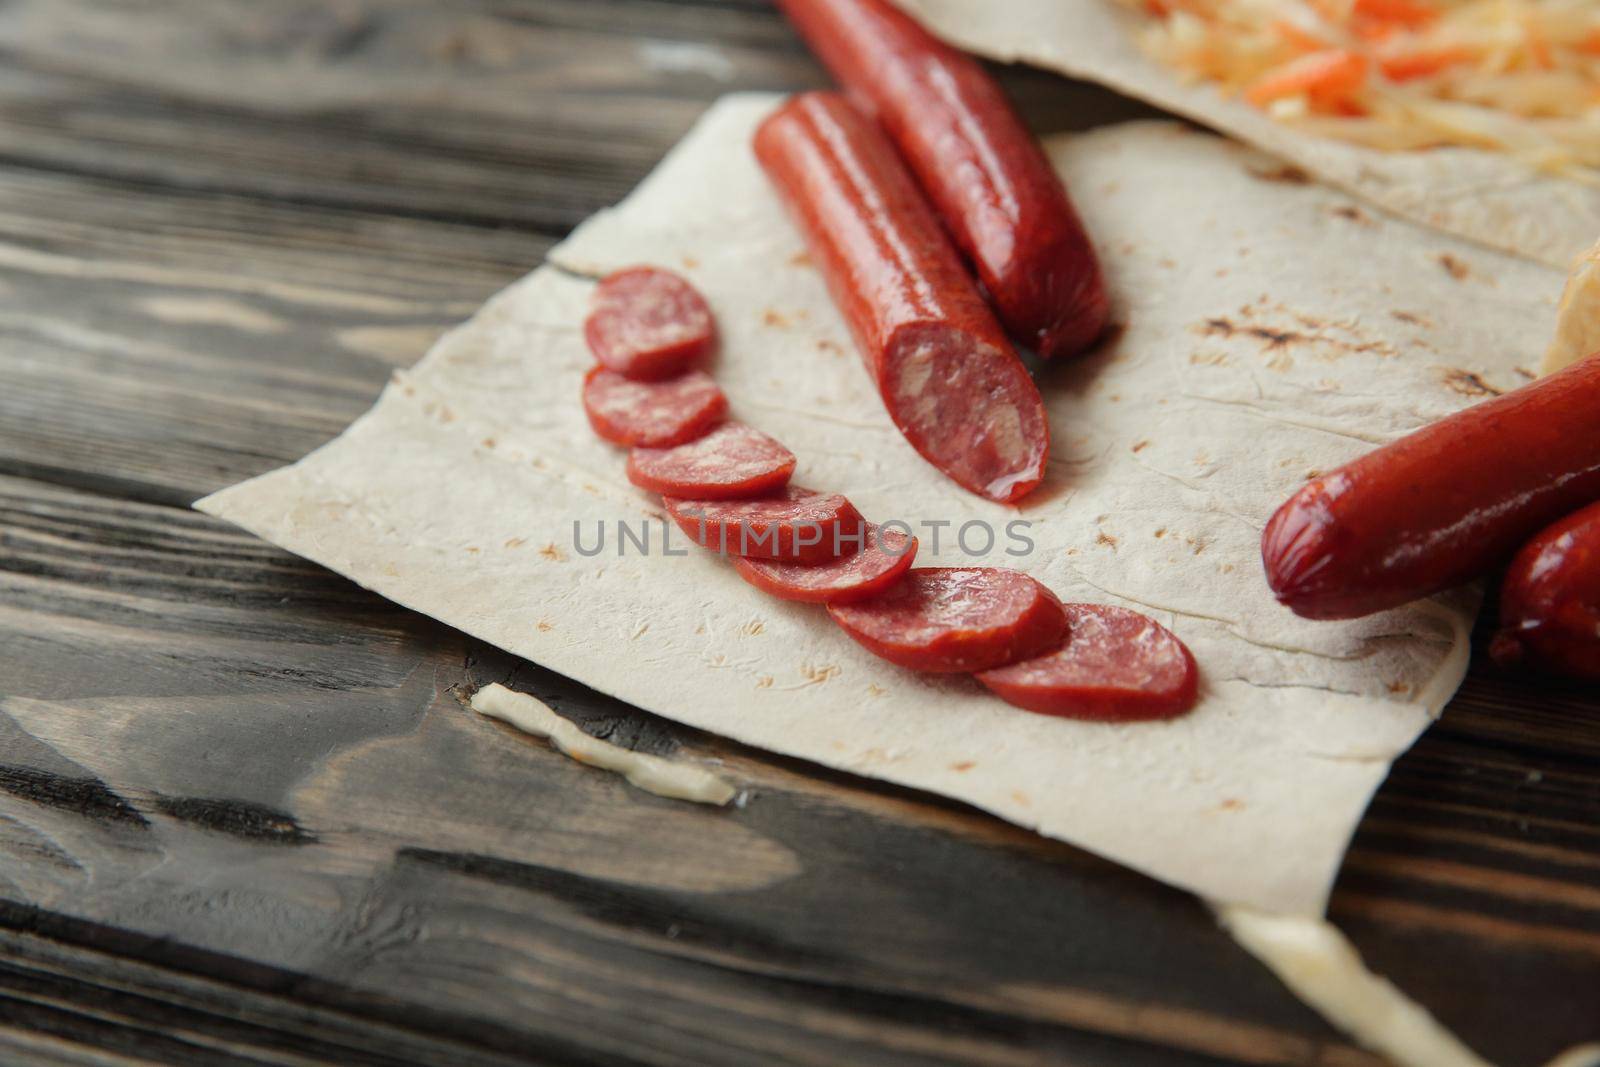 sausage prepared for cooking burritos.photo with copy space by SmartPhotoLab